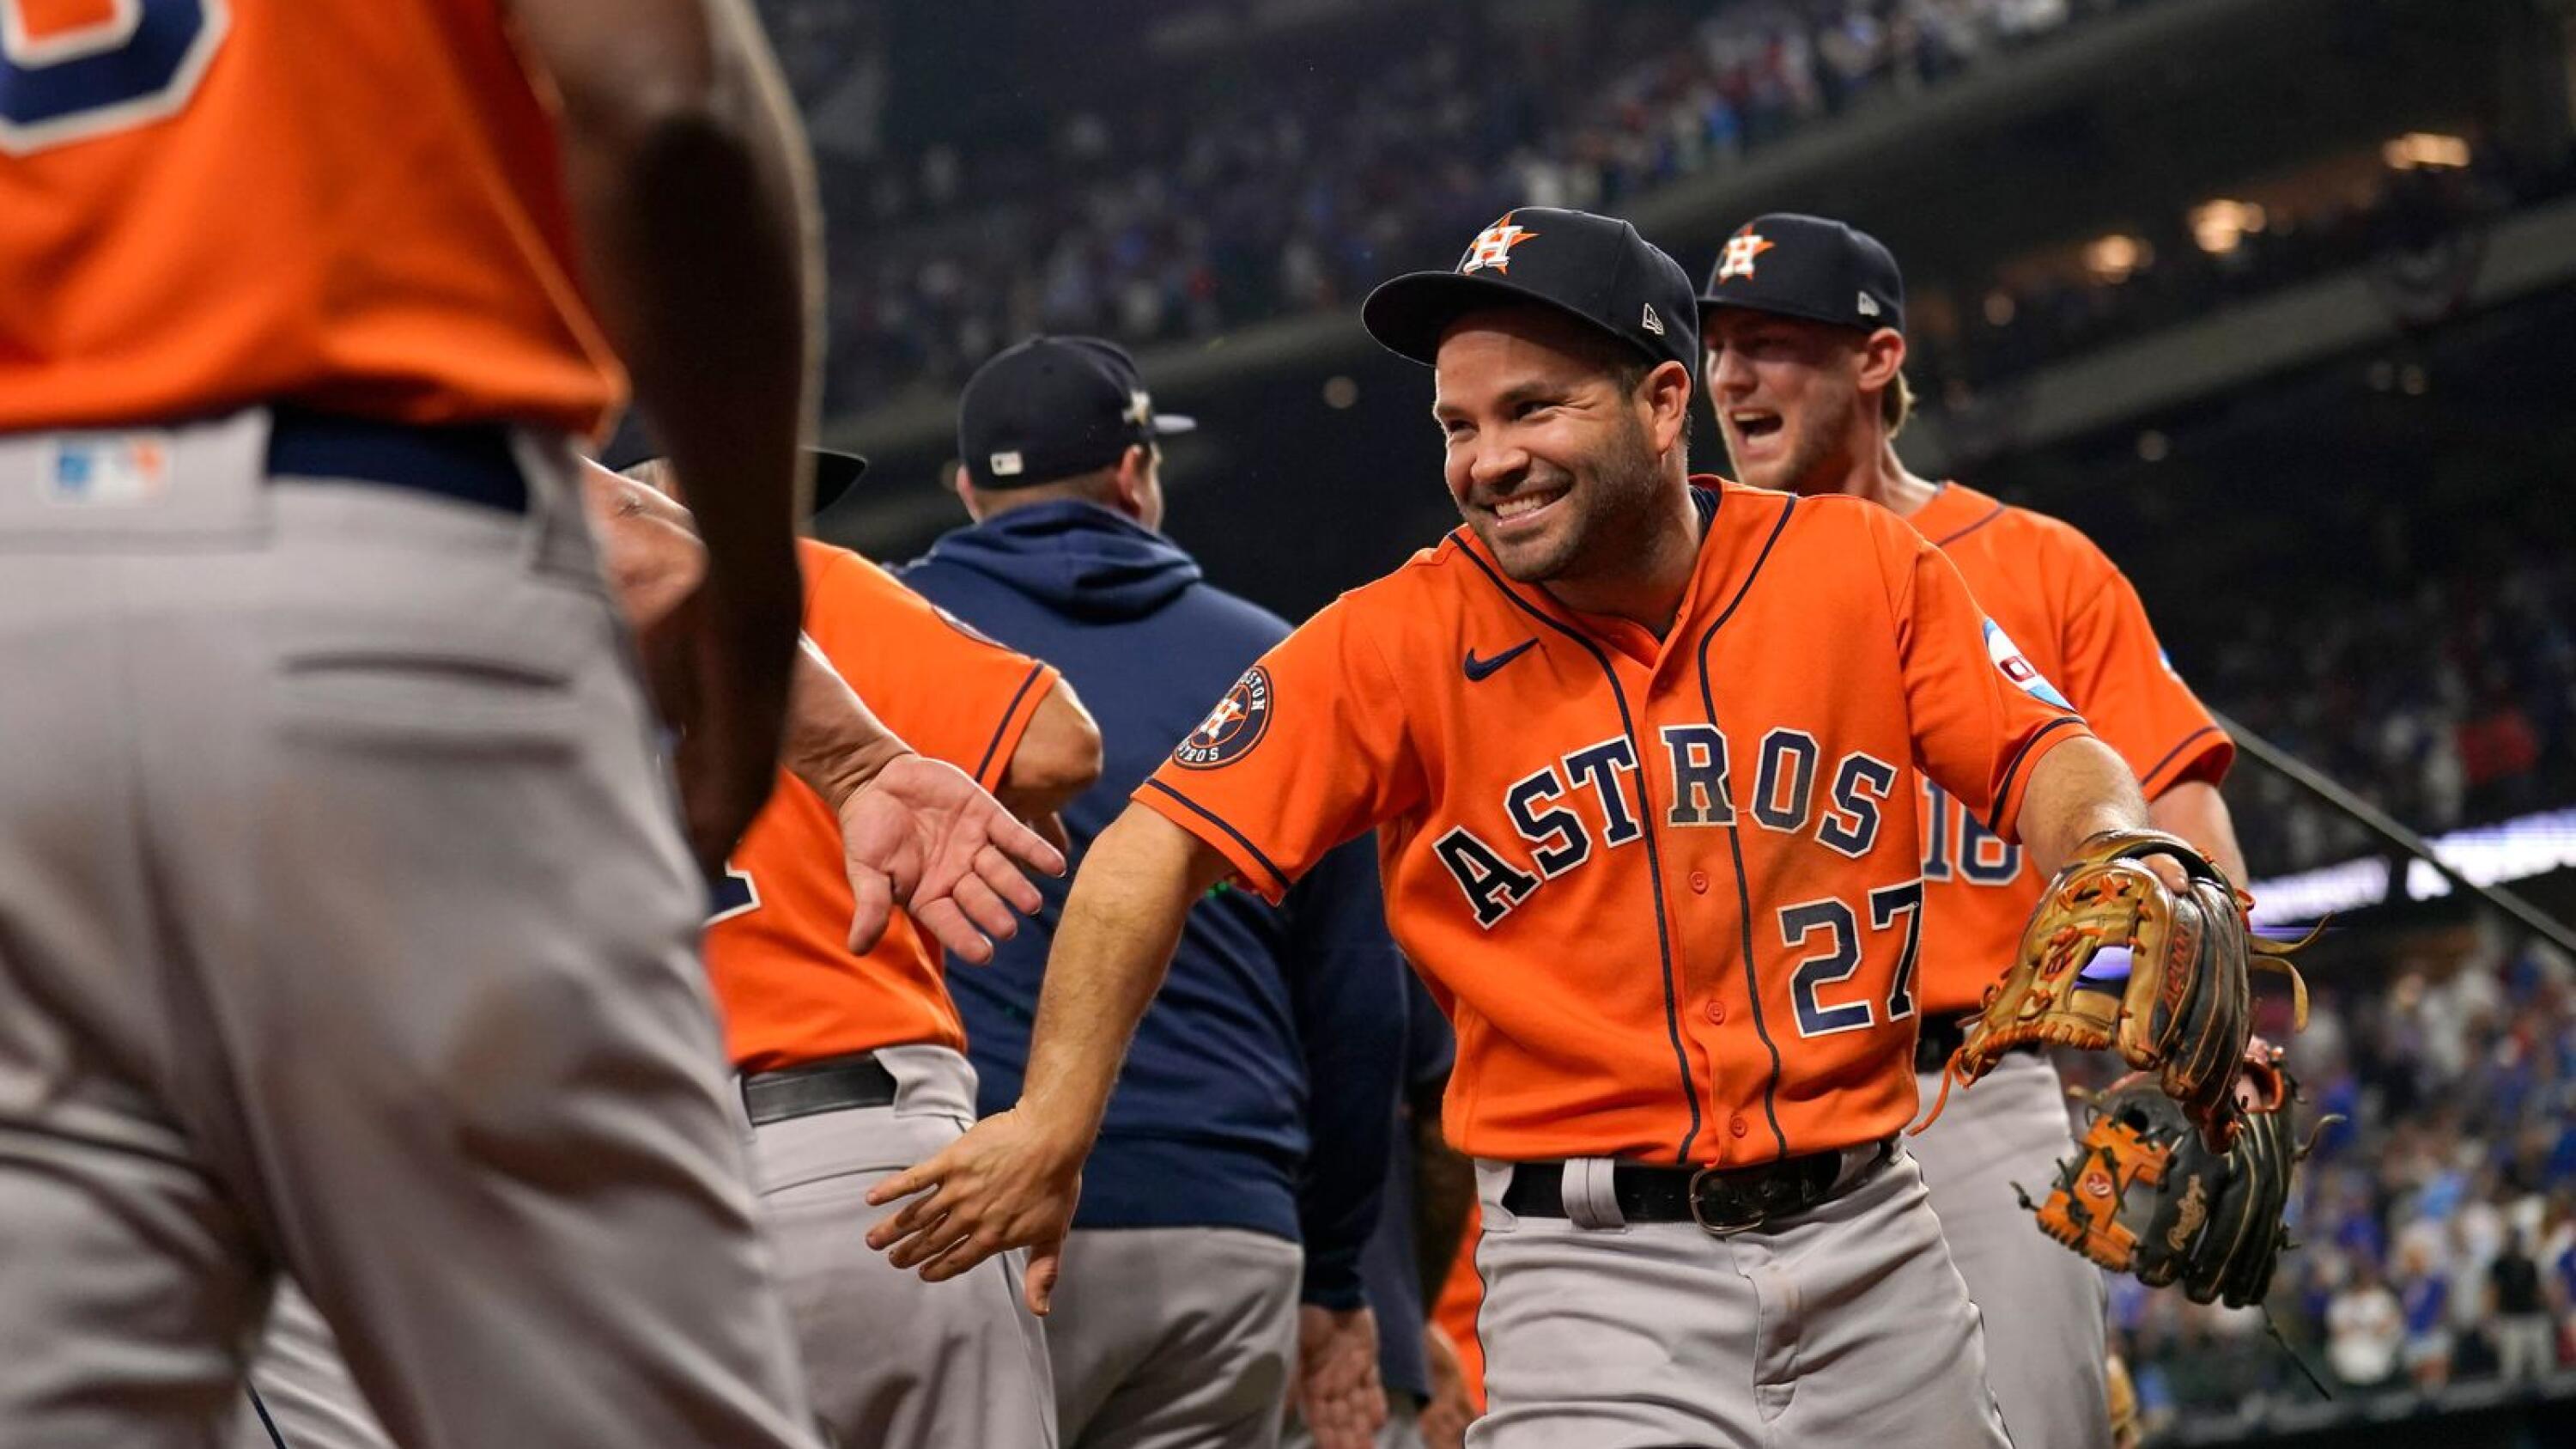 VIDEO: Jose Altuve Celebrating Astros' ALCS Win With His Family is